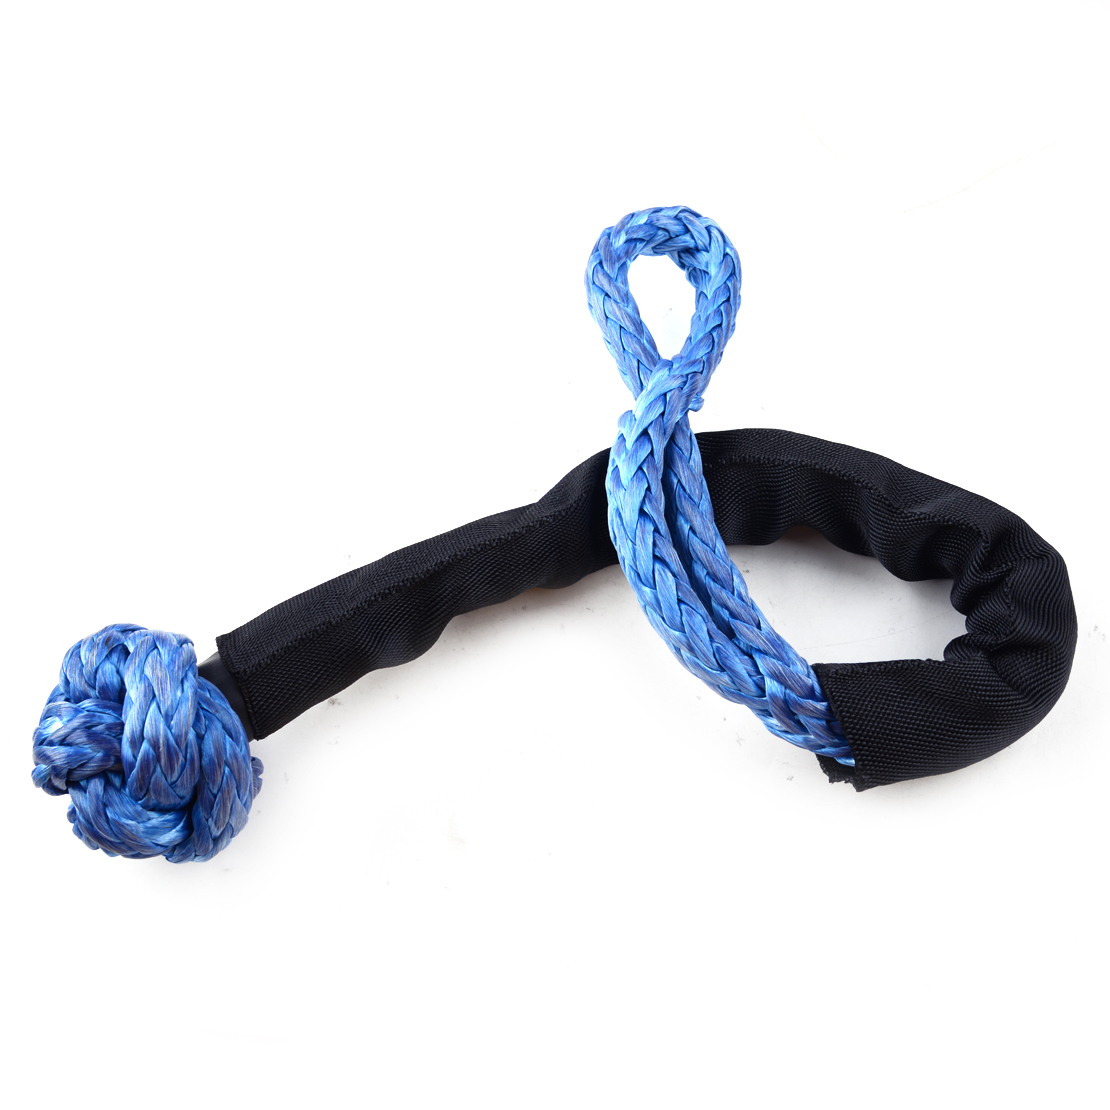 Nylon Blue Flexible Synthetic Soft Shackle Winch Rope Towing Recovery Straps 35000LB 16T